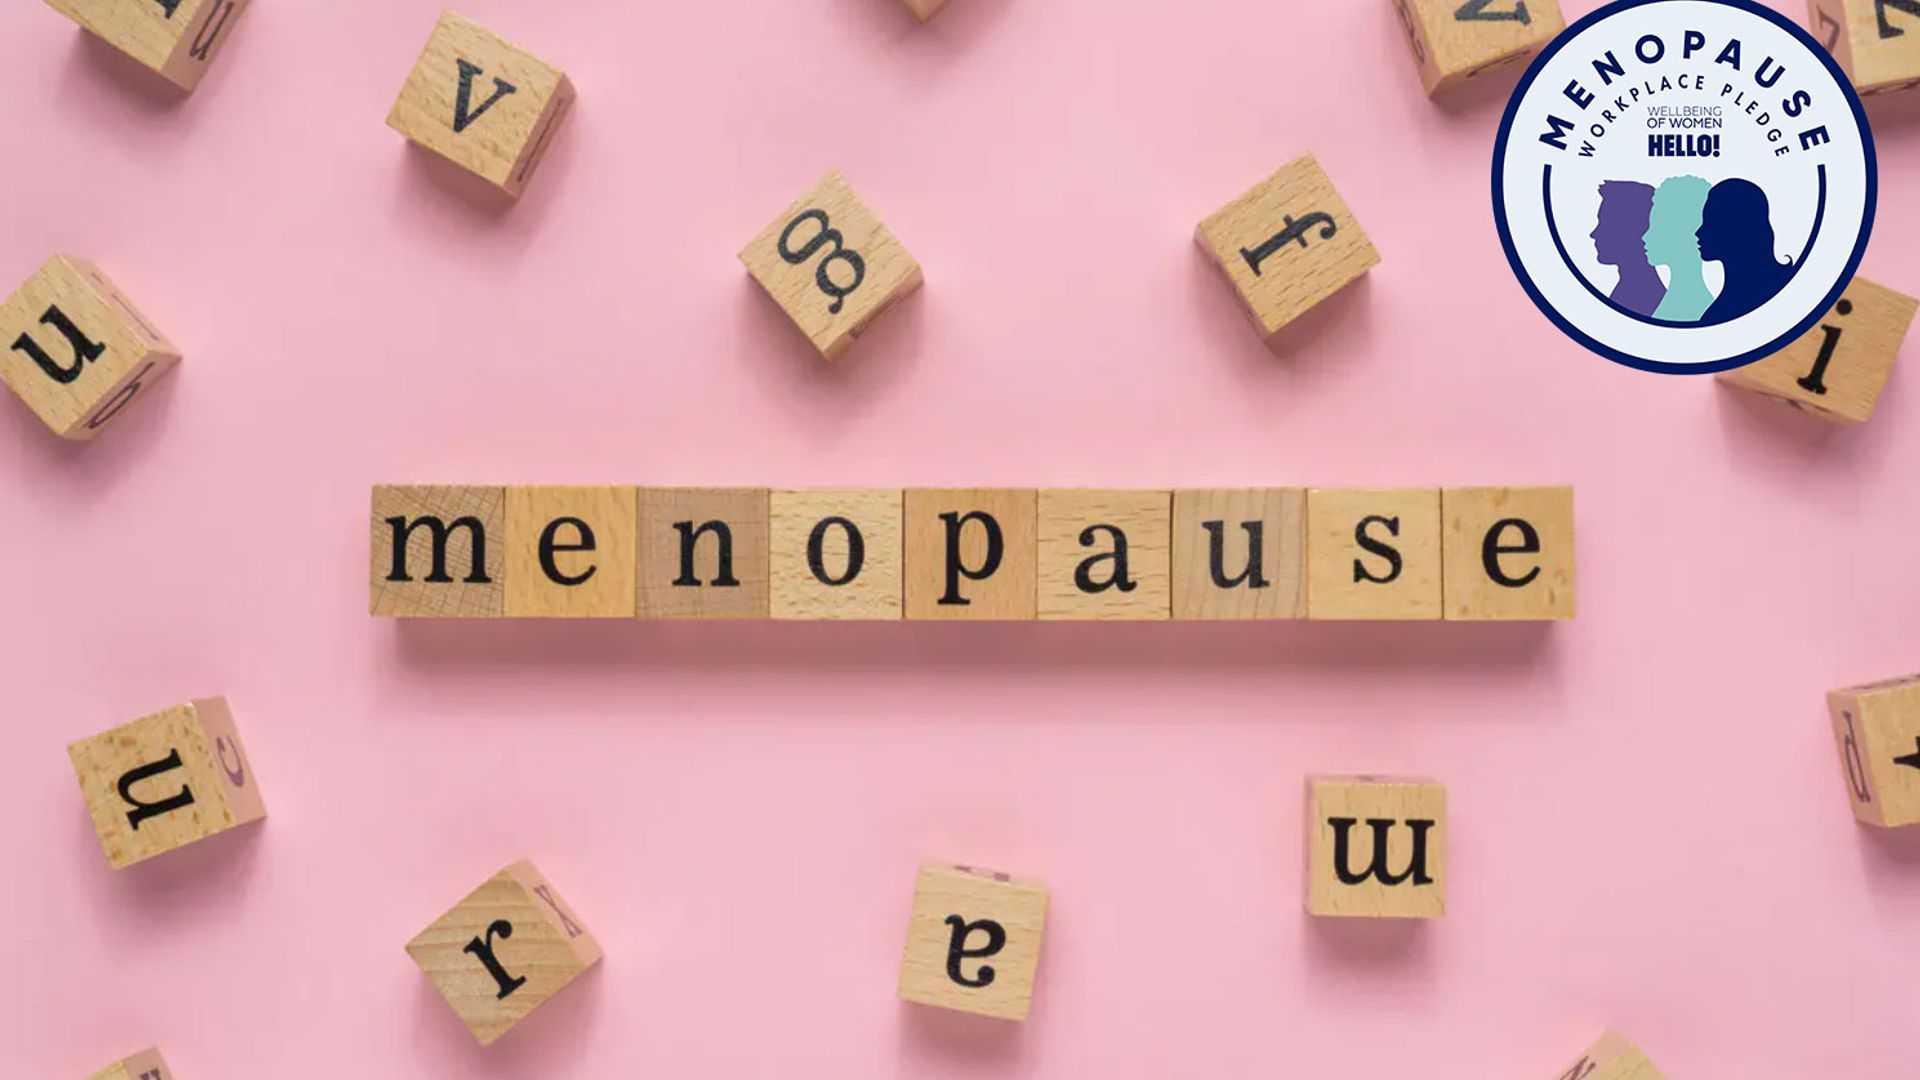 36 symptoms of menopause and how to treat them – expert advice